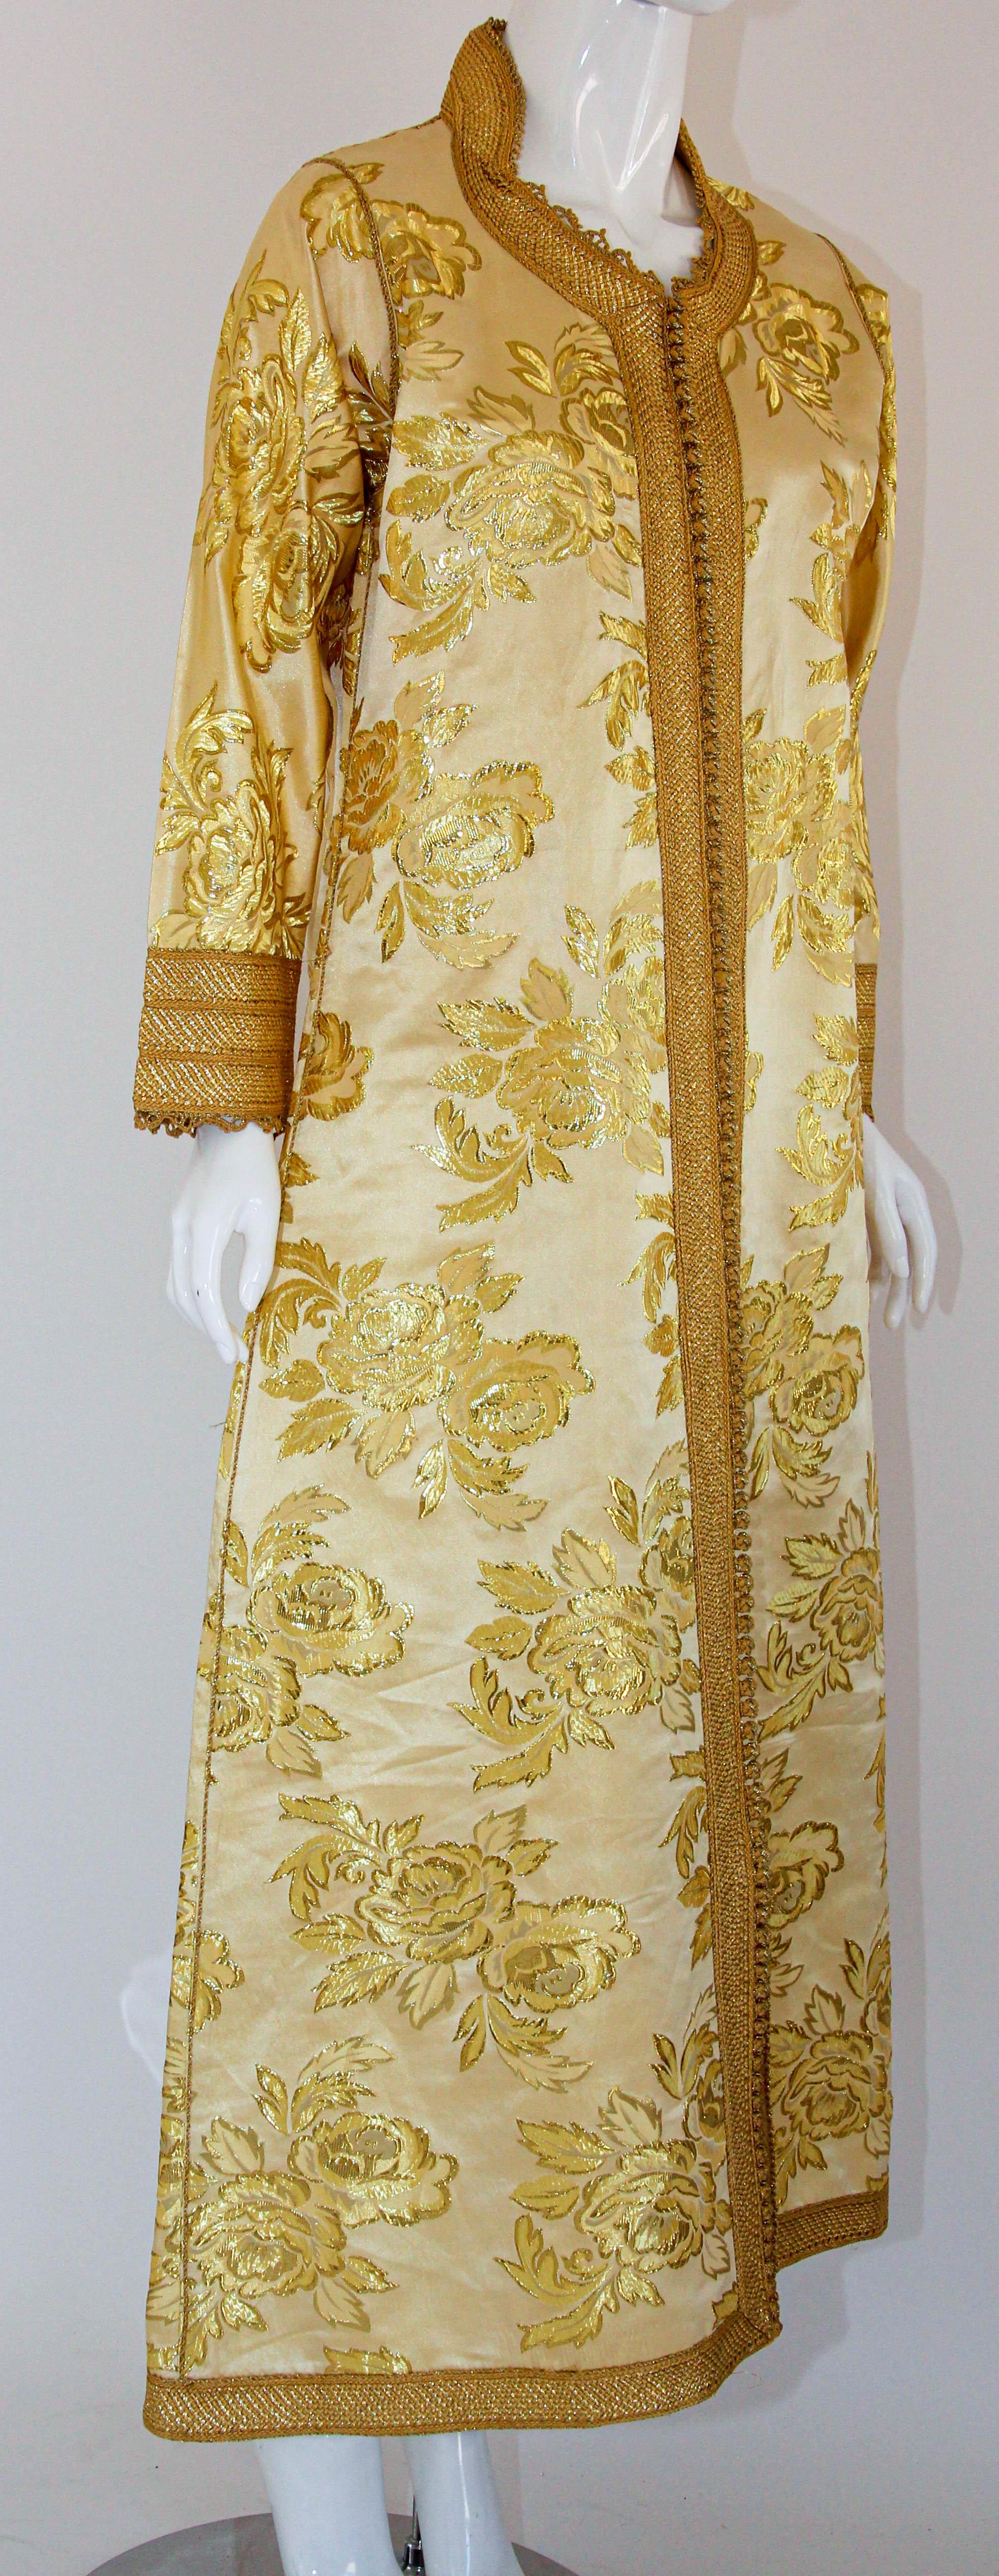 1970s vintage metallic gold brocade dress kaftan with gold trim.
Hand-made ceremonial caftan from North Africa, Morocco.
Vintage exotic 1970s gold damask metallic brocade caftan gown.
The luminous gold metallic caftan maxi dress caftan is made in a